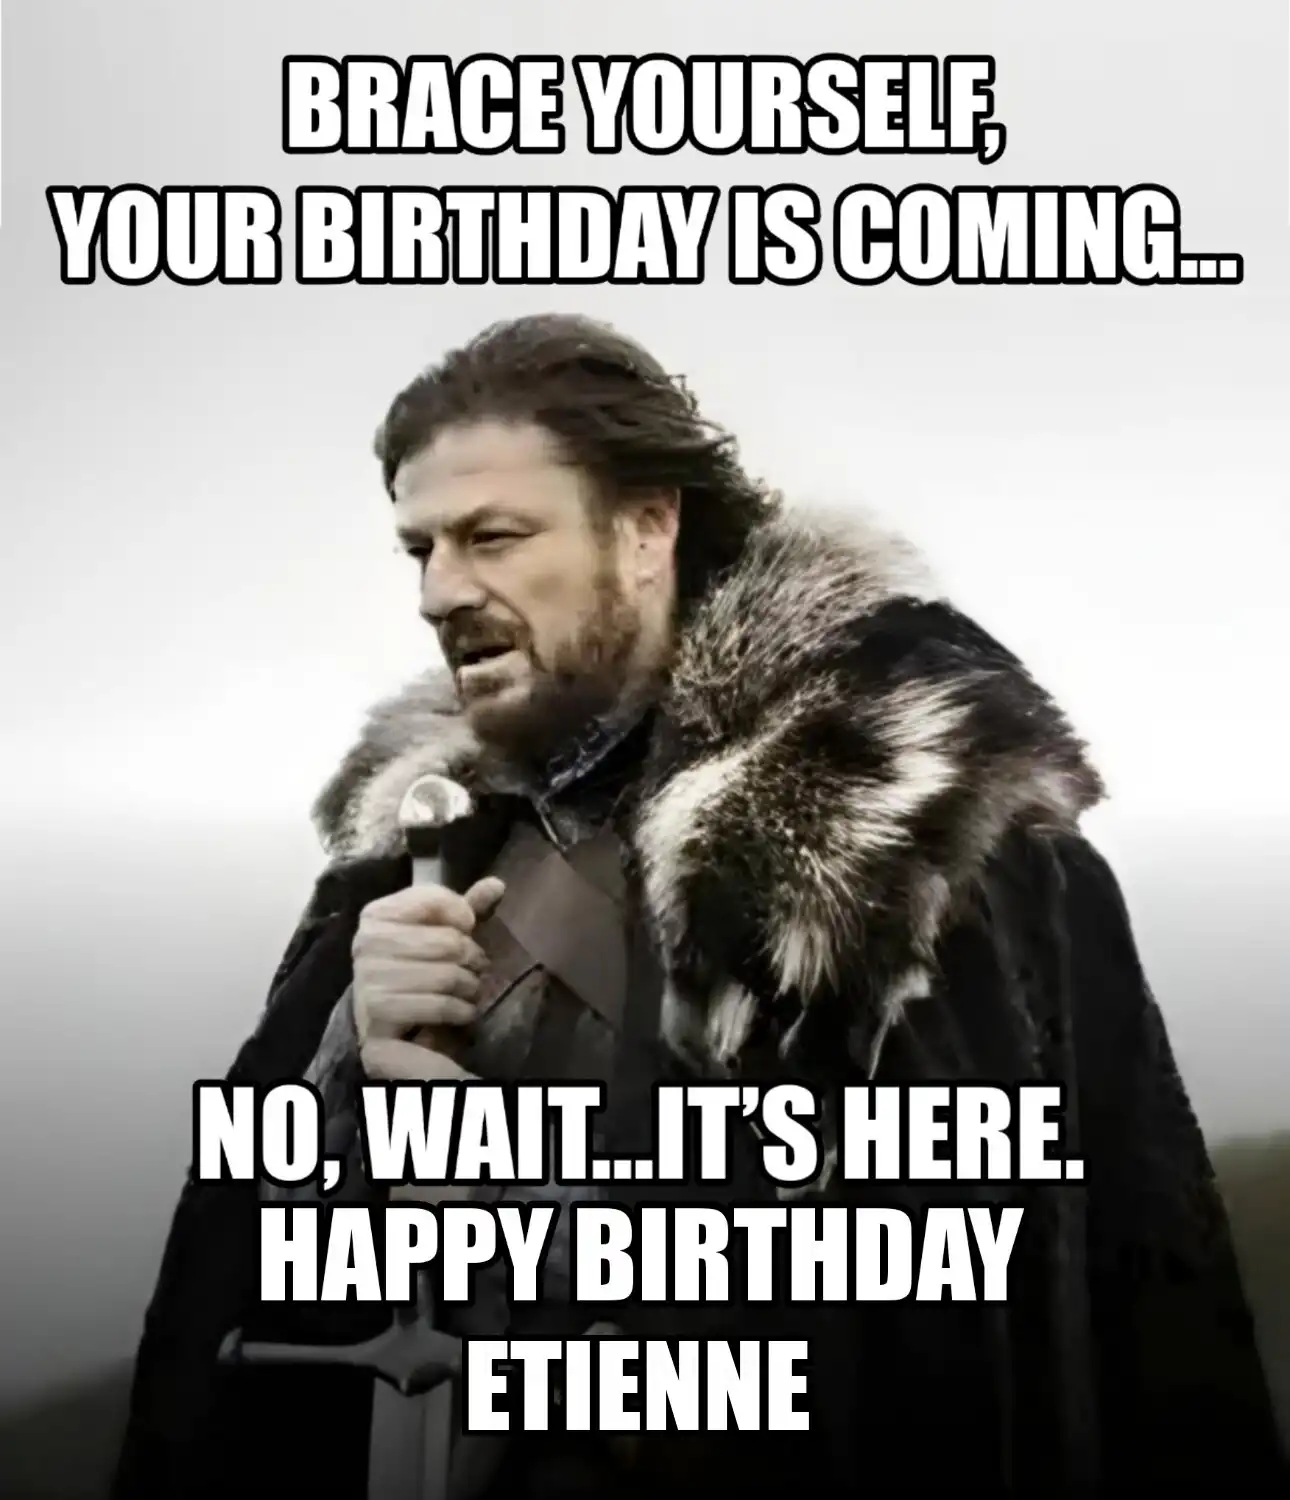 Happy Birthday Etienne Brace Yourself Your Birthday Is Coming Meme